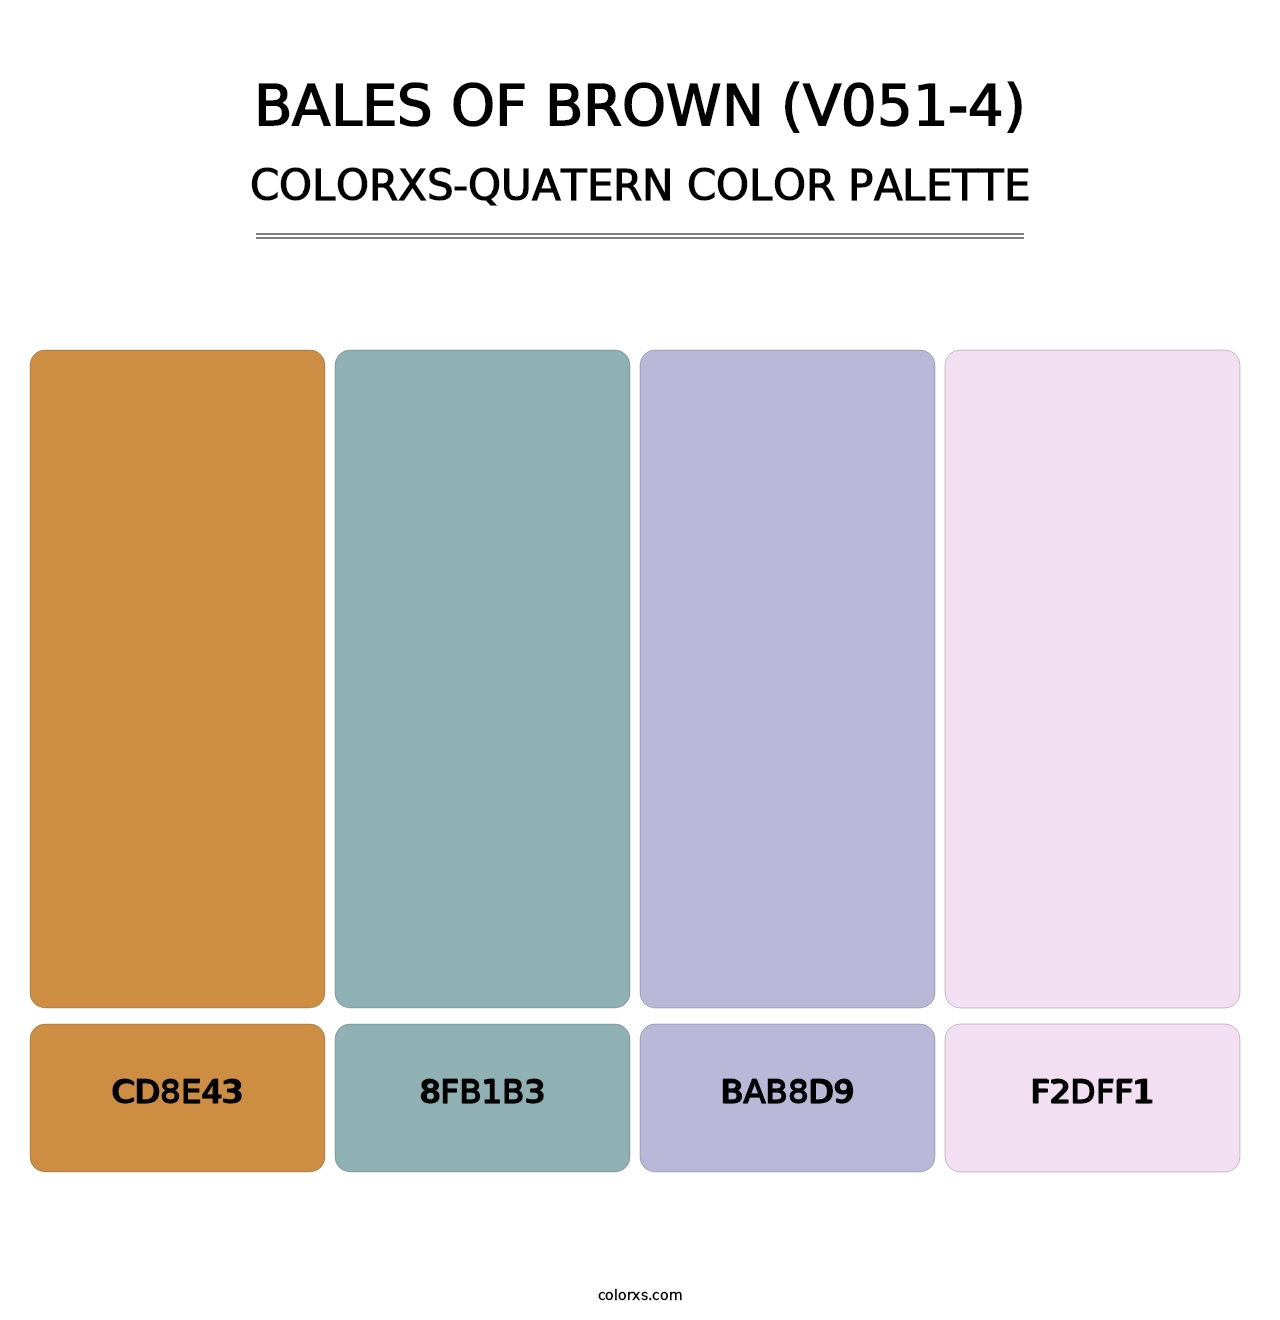 Bales of Brown (V051-4) - Colorxs Quatern Palette